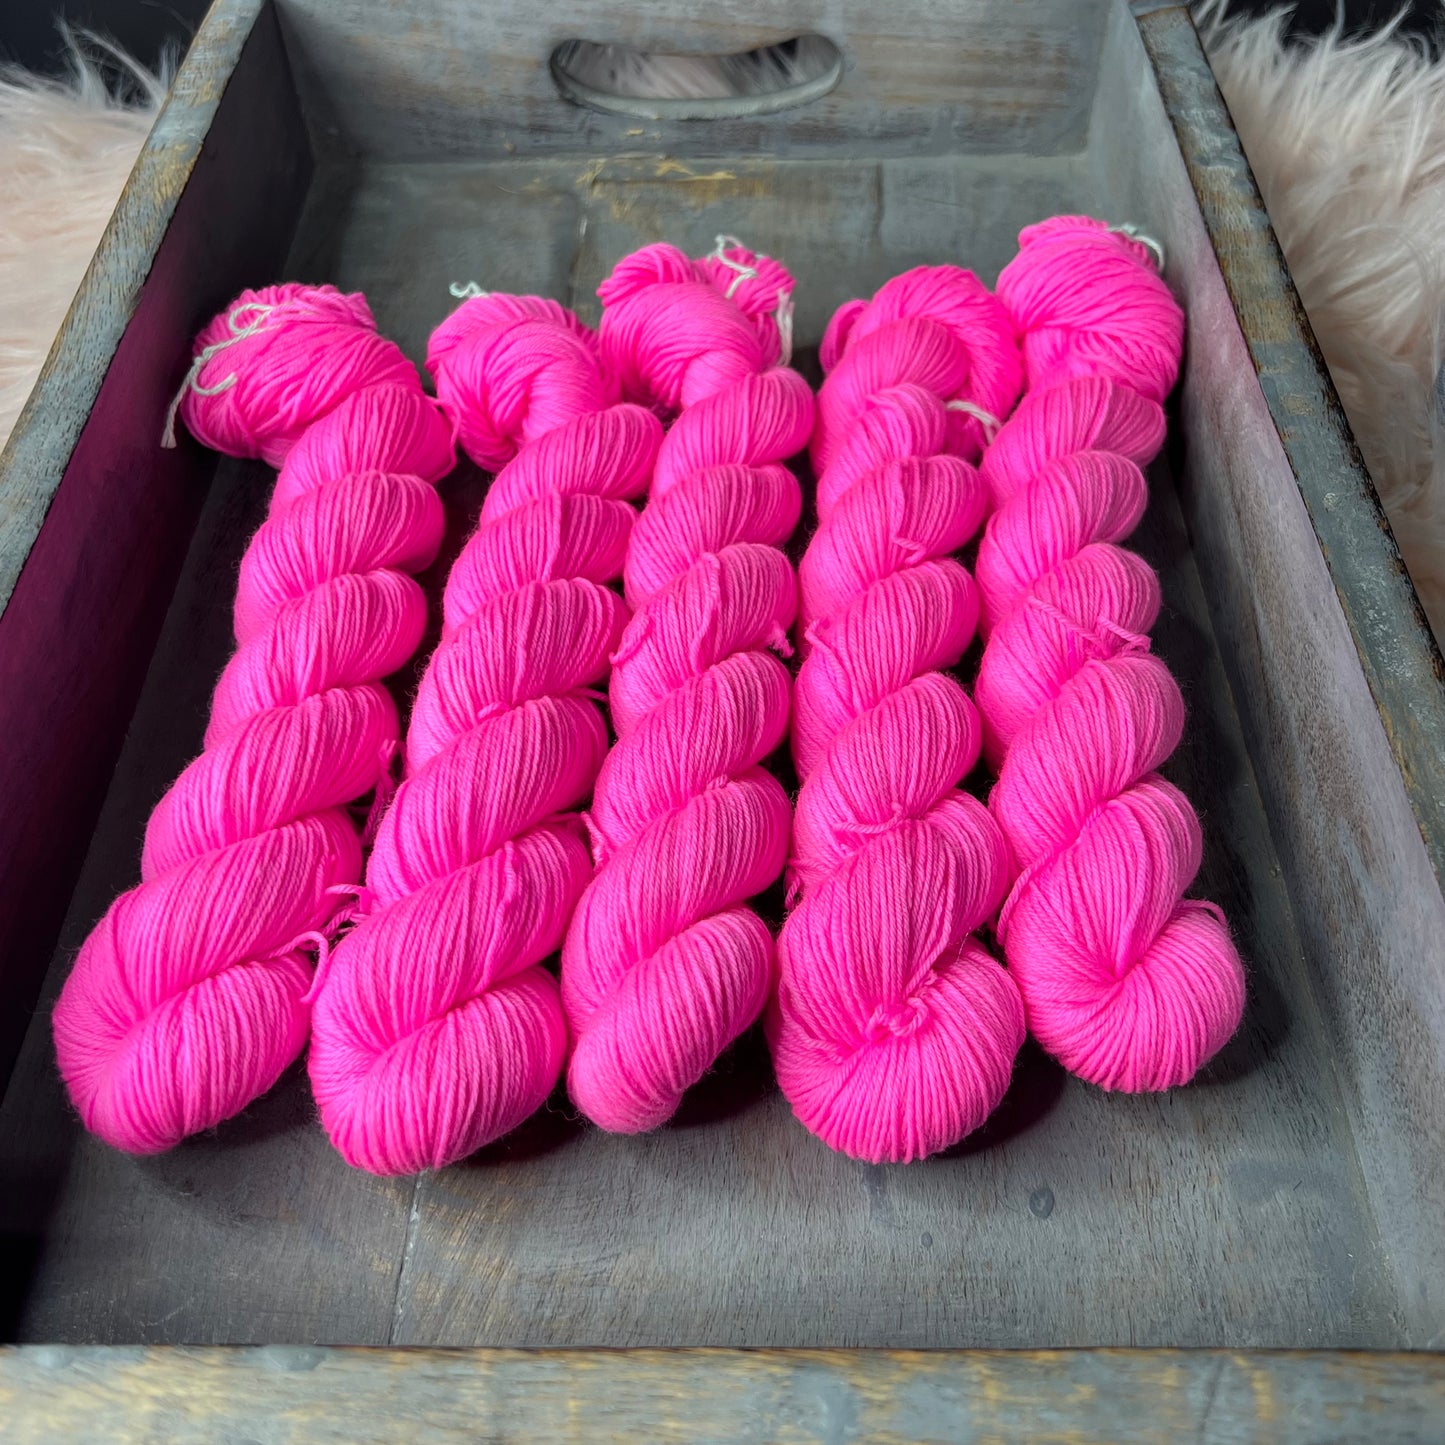 Jimmy Sock- 50g - Mini Skein - Now that’s what I call pink